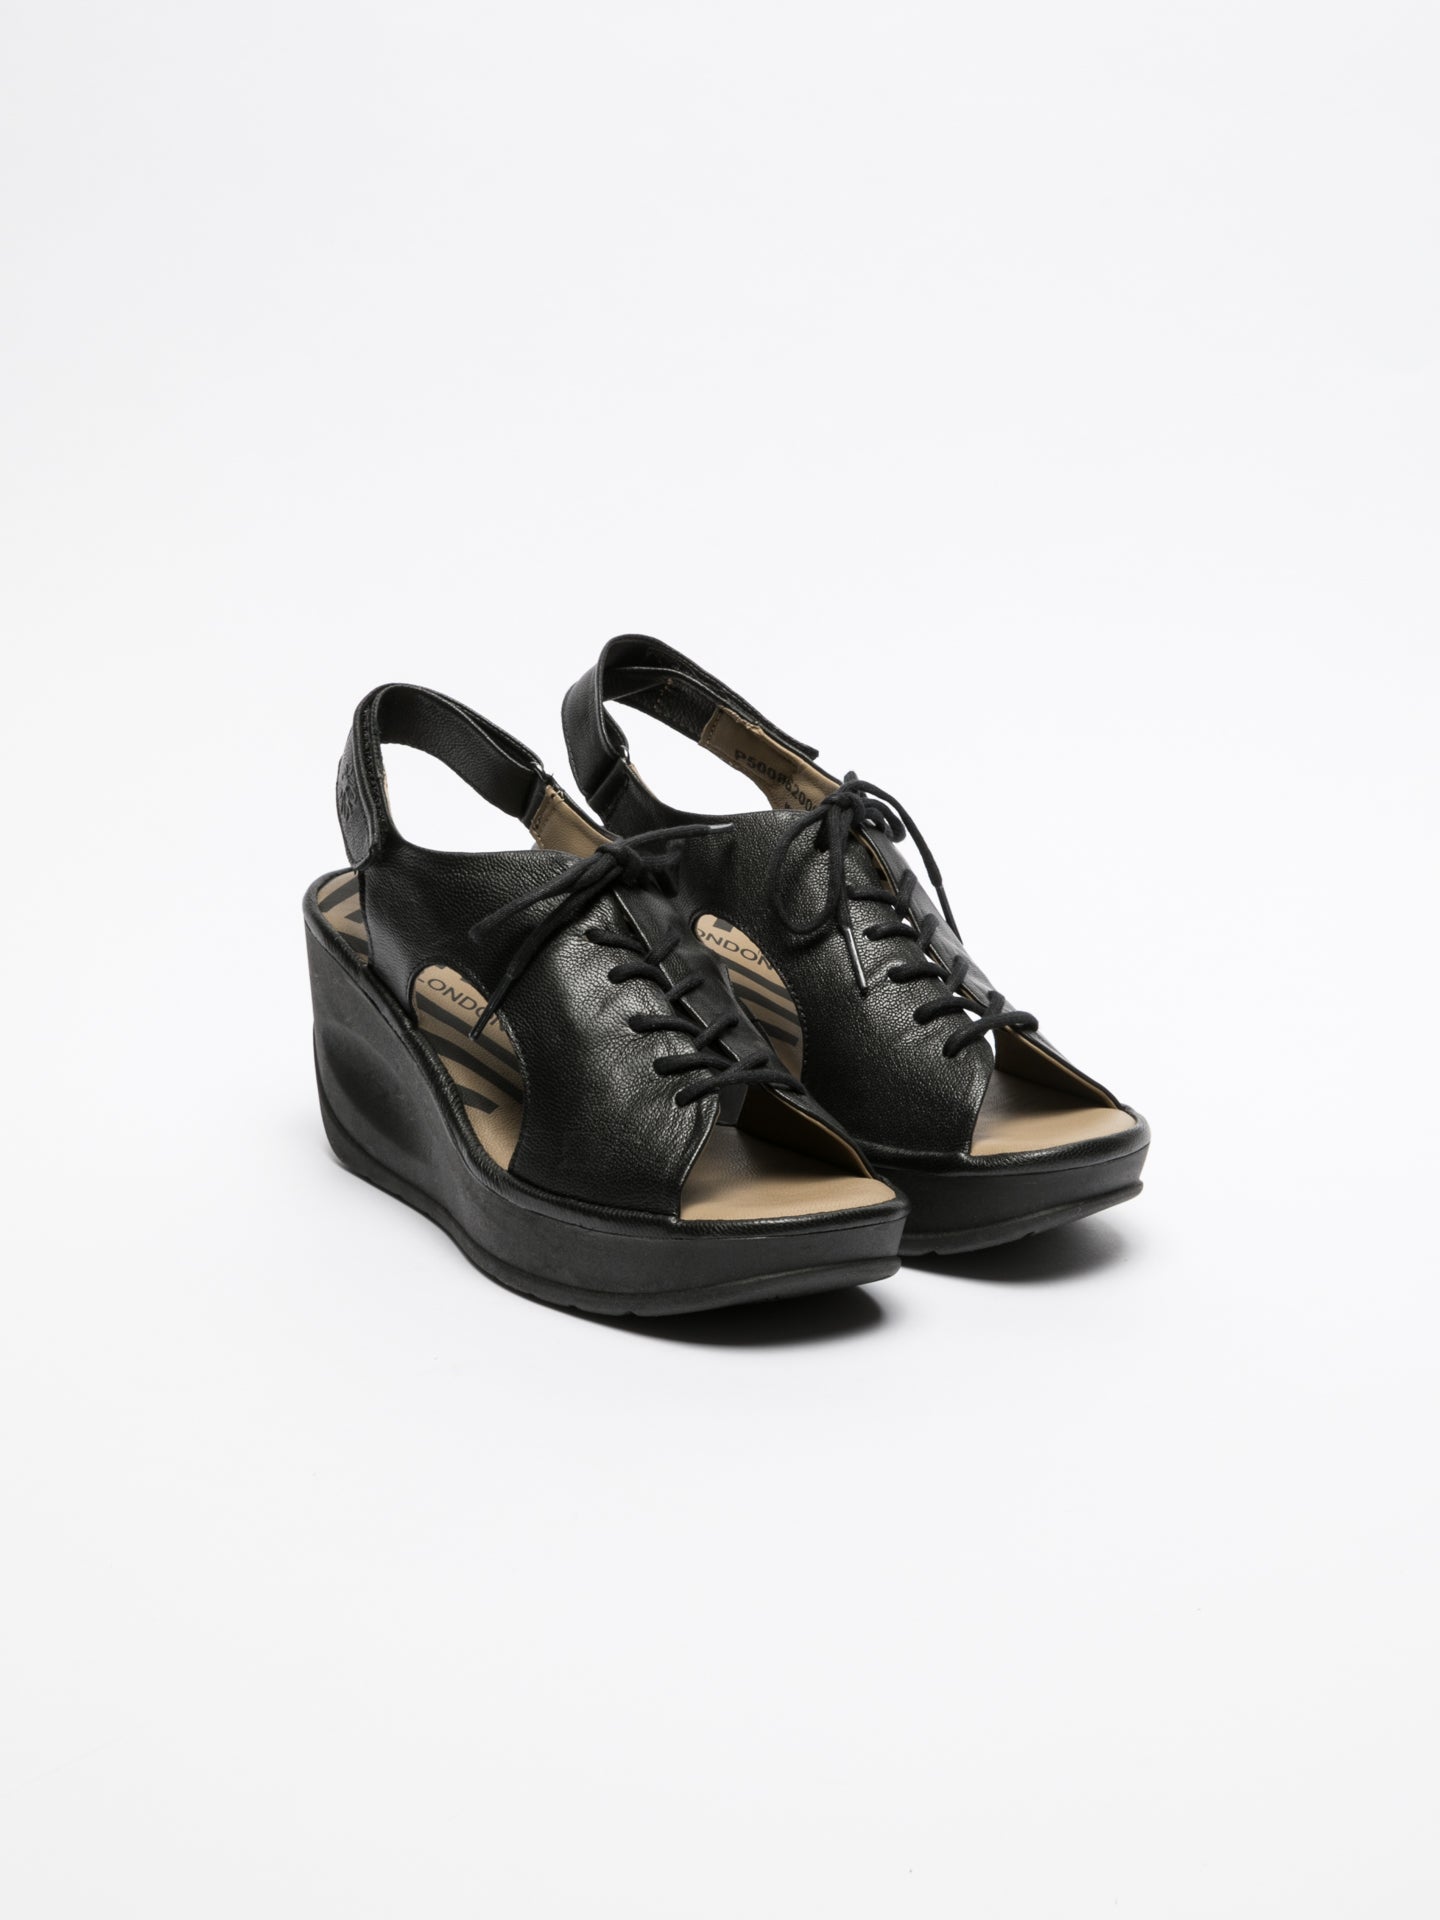 Fly London Black Lace-up Sandals